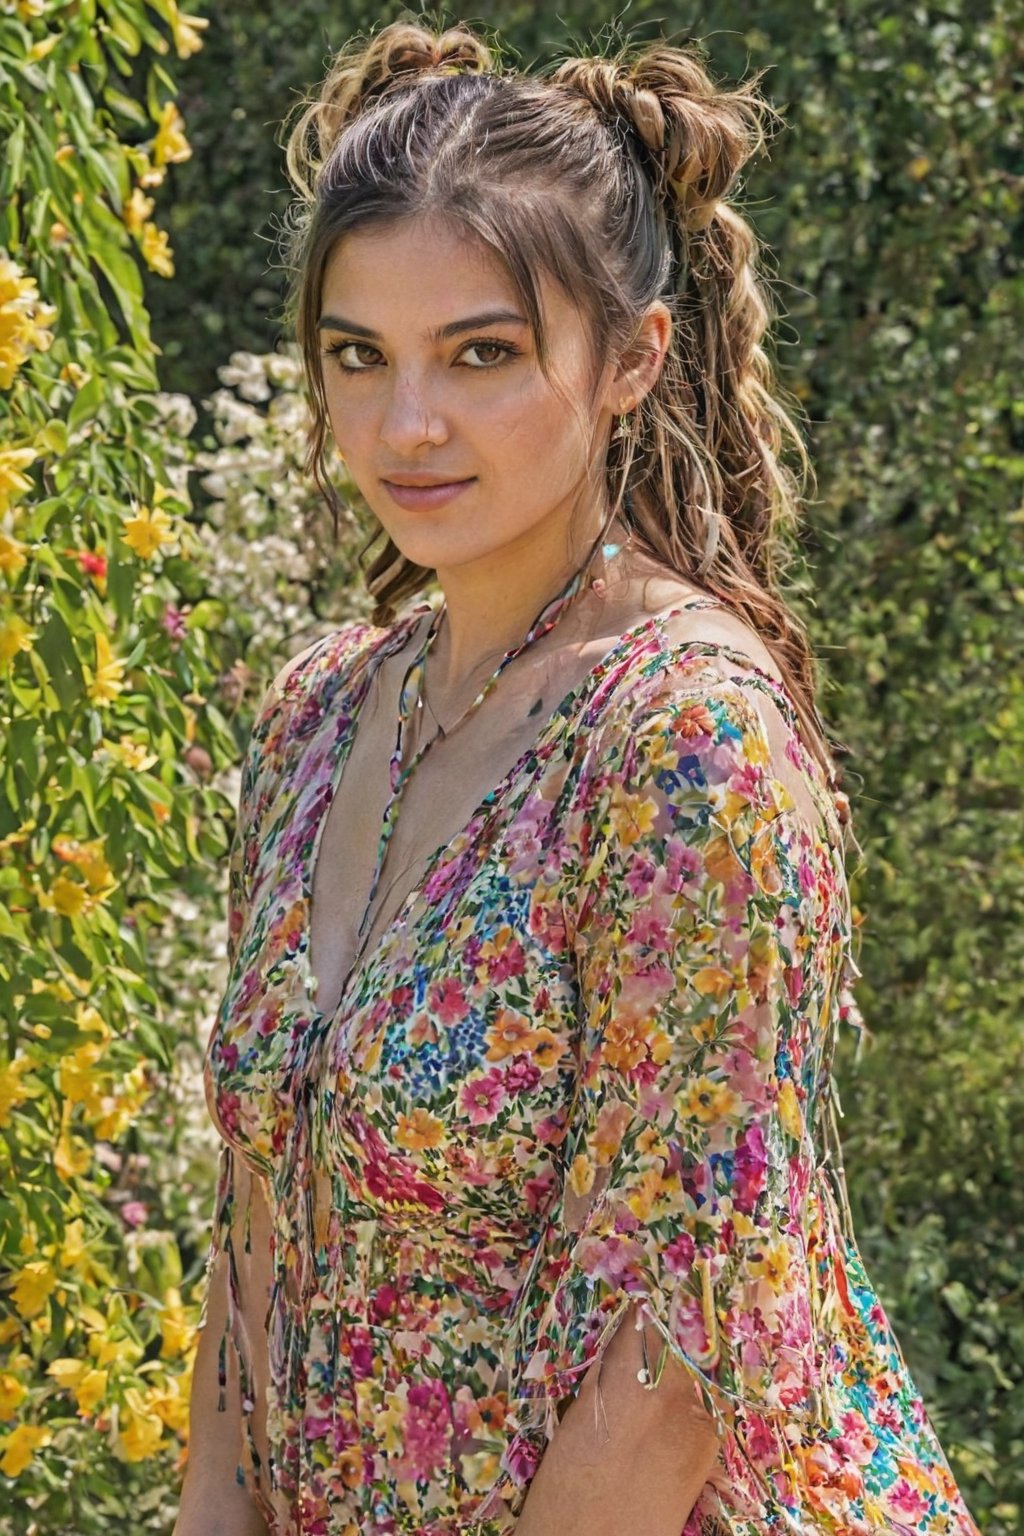 Generate hyper realistic image of a playful Persian  with charming braided pigtails, a sun-kissed complexion, and dressed in a boho floral maxi dress with fringe accessories. She teasingly poses amidst vibrant flowers in a sunlit and colorful garden.. up close